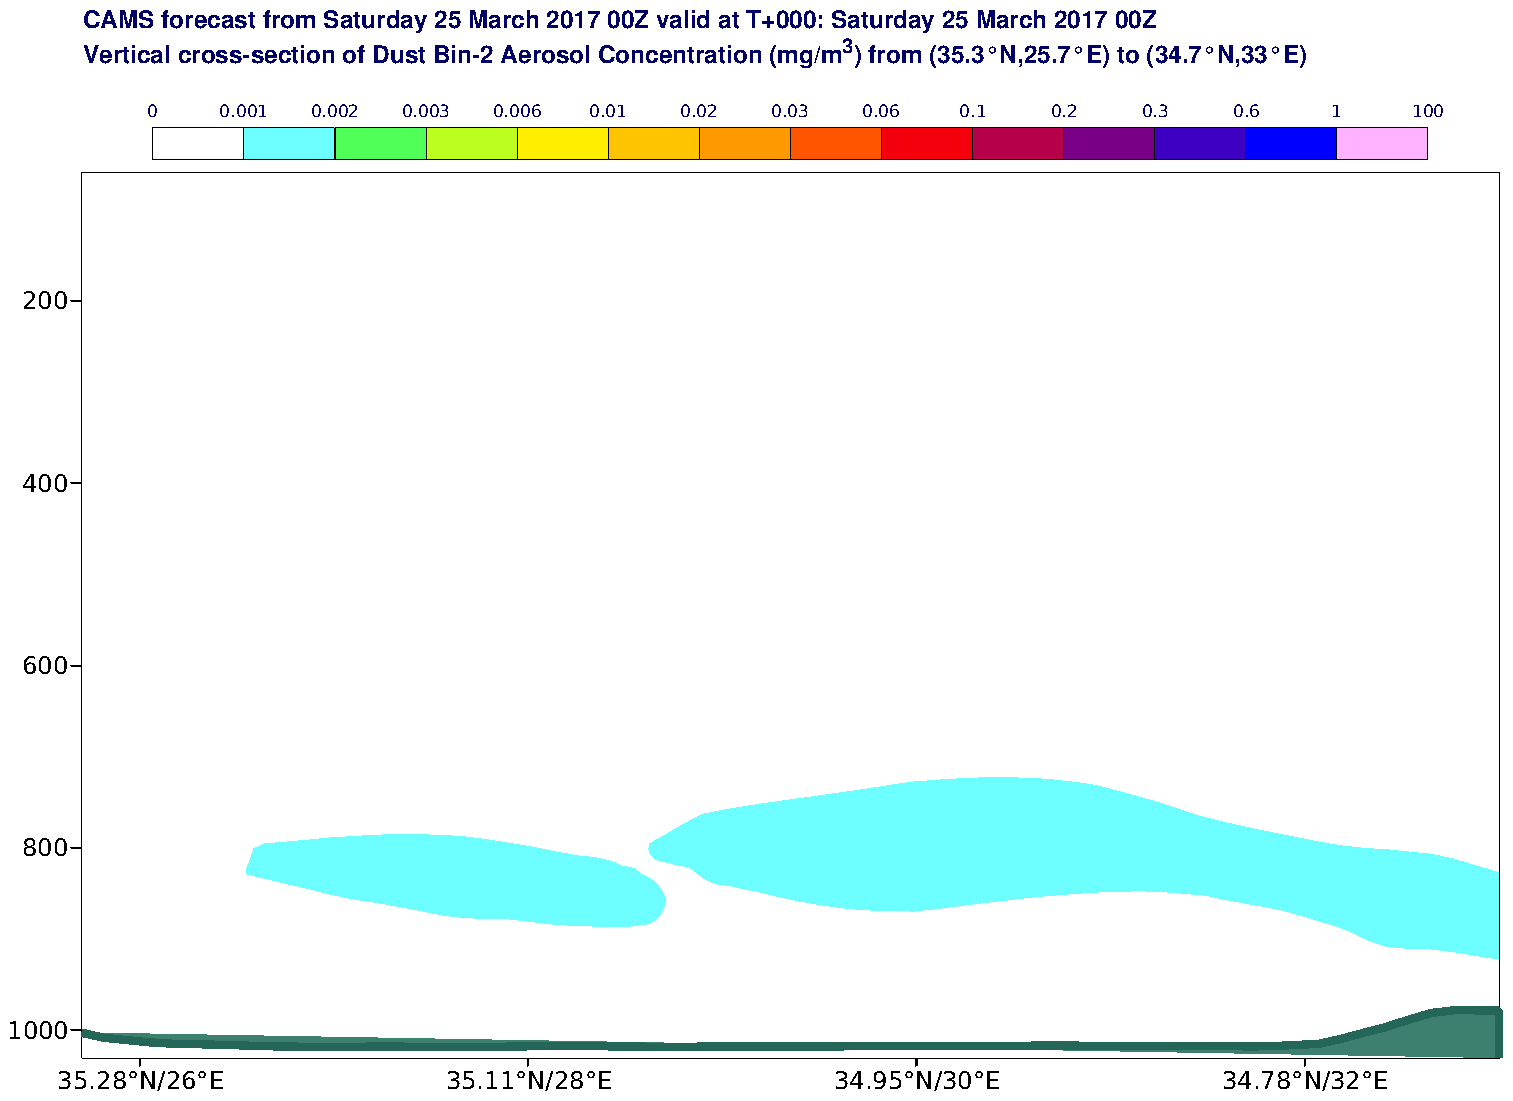 Vertical cross-section of Dust Bin-2 Aerosol Concentration (mg/m3) valid at T0 - 2017-03-25 00:00